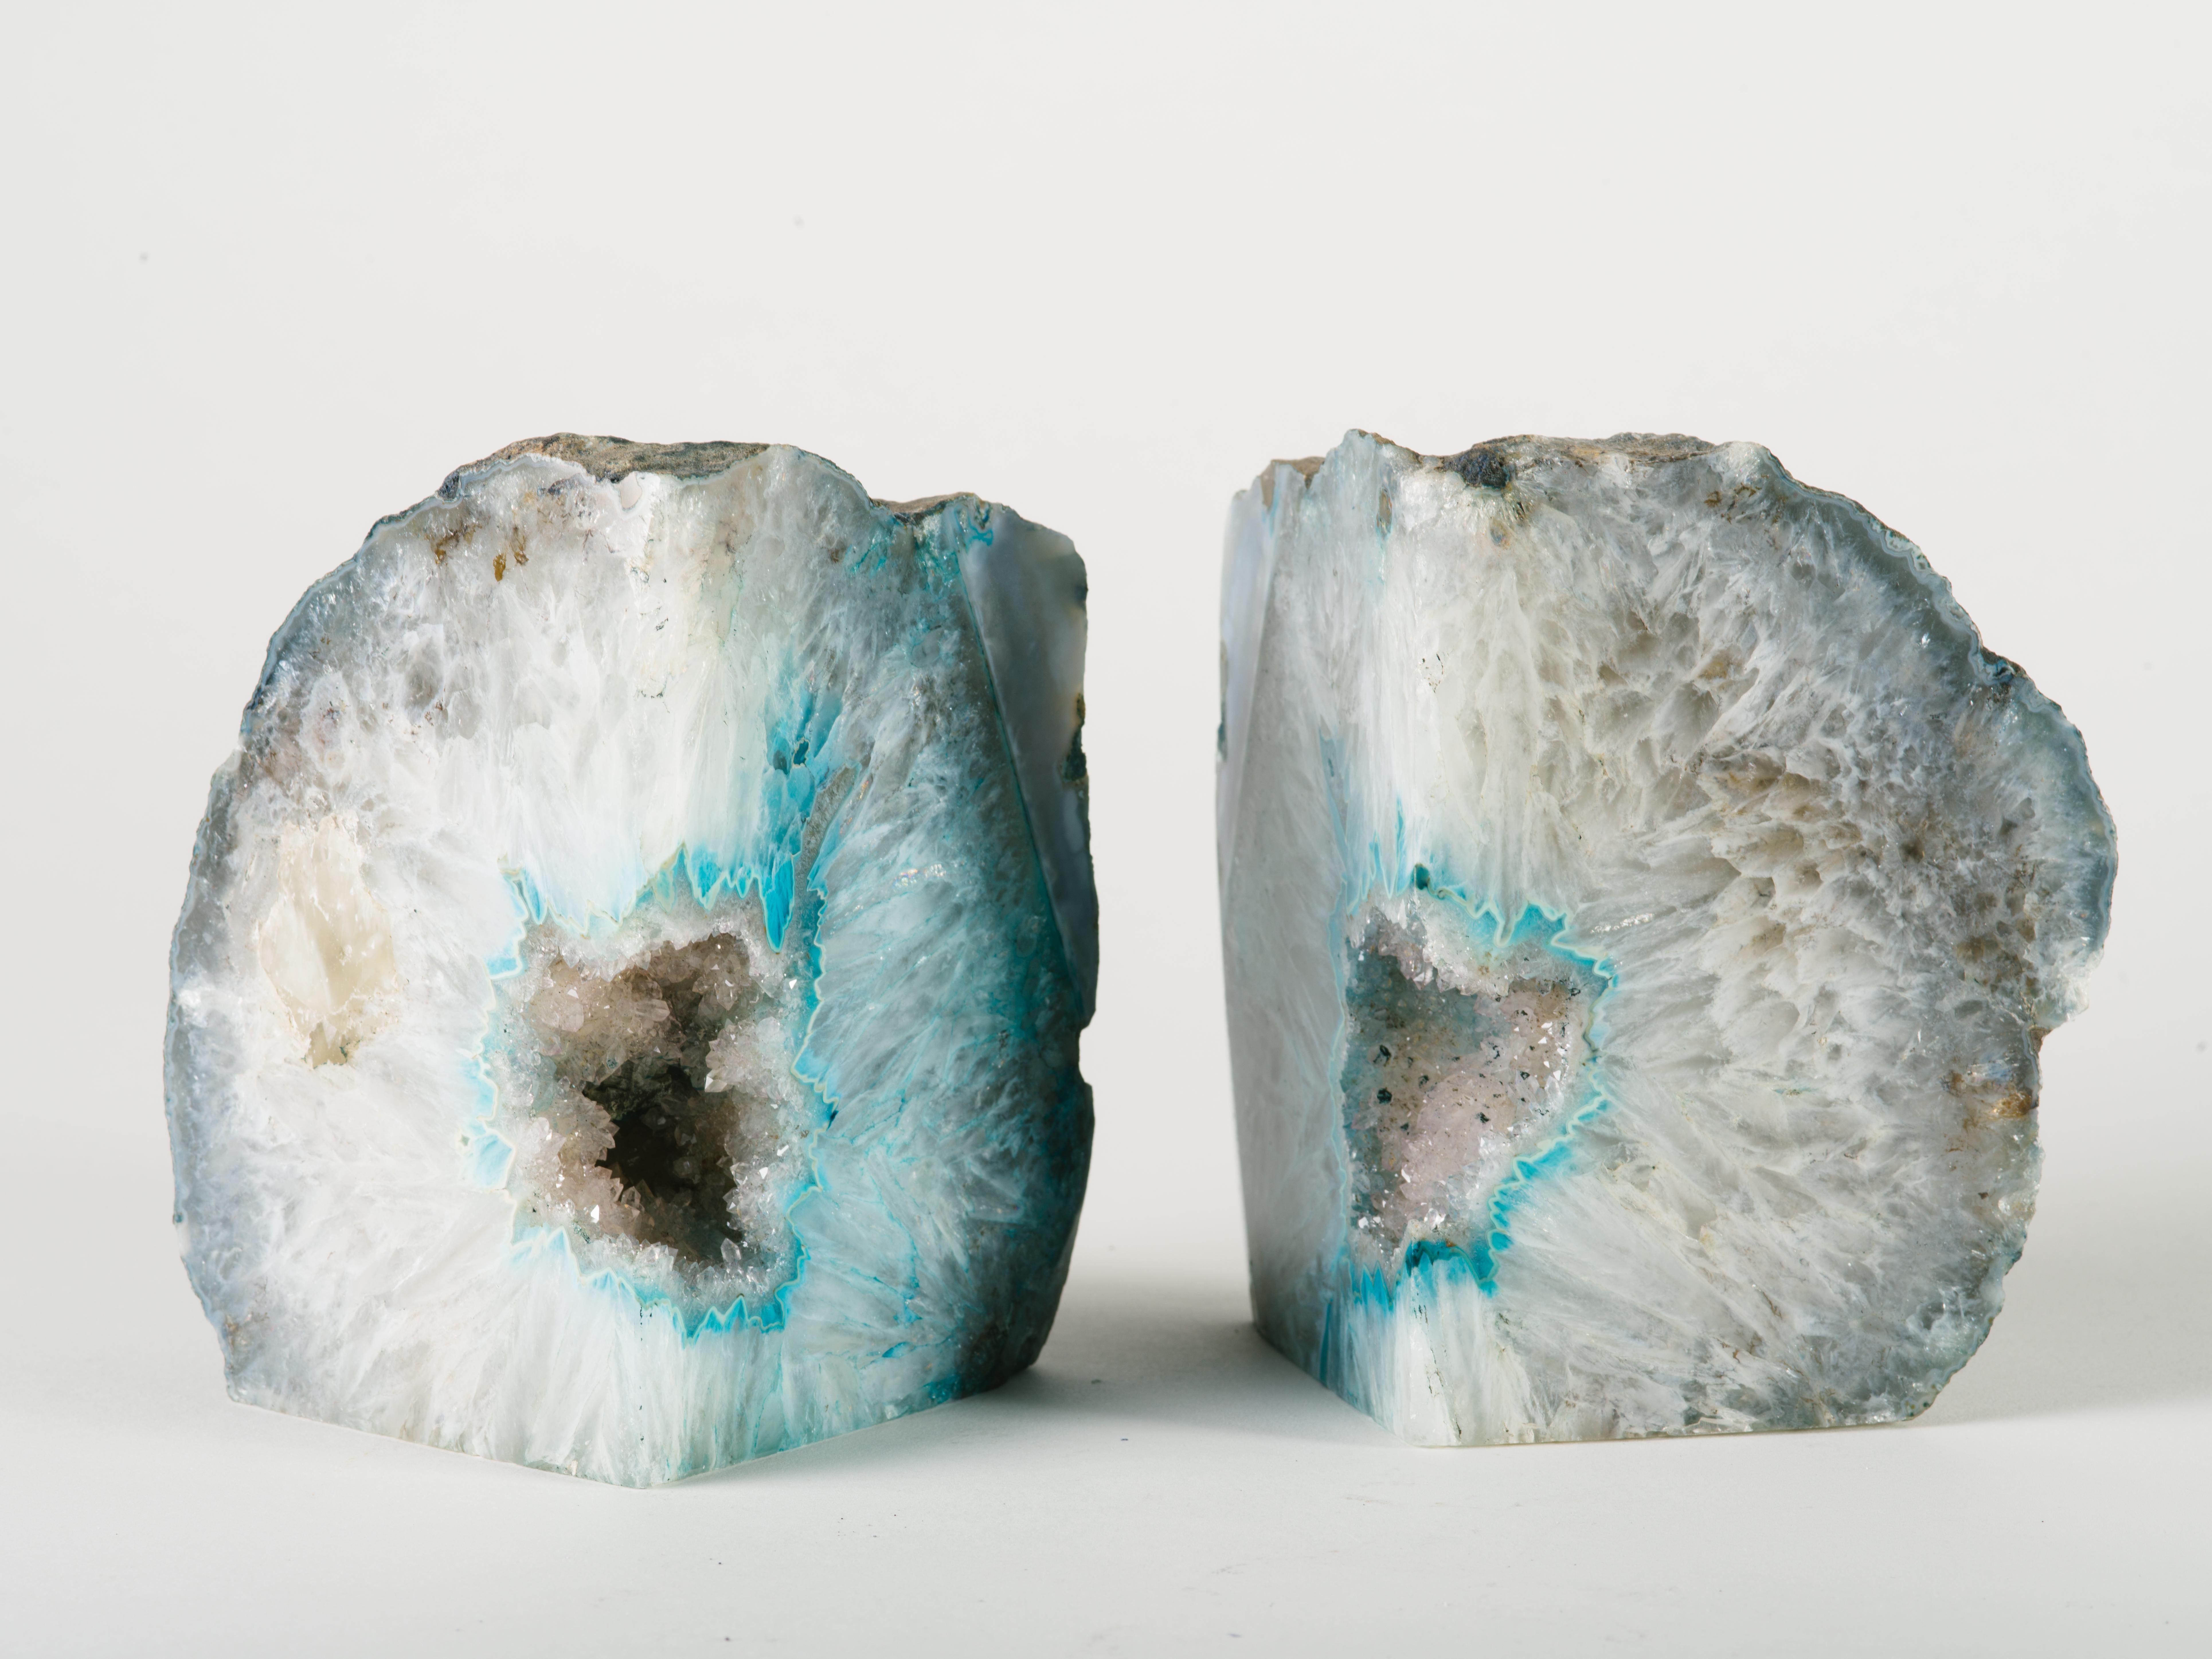 Exquisite pair of hand-carved semi precious gemstone bookends with white crystalline centers. Hand polished quartz geode with natural streaks in hues of teal and turquoise. Allows for multiple configurations and are beautiful from all angles. Rough